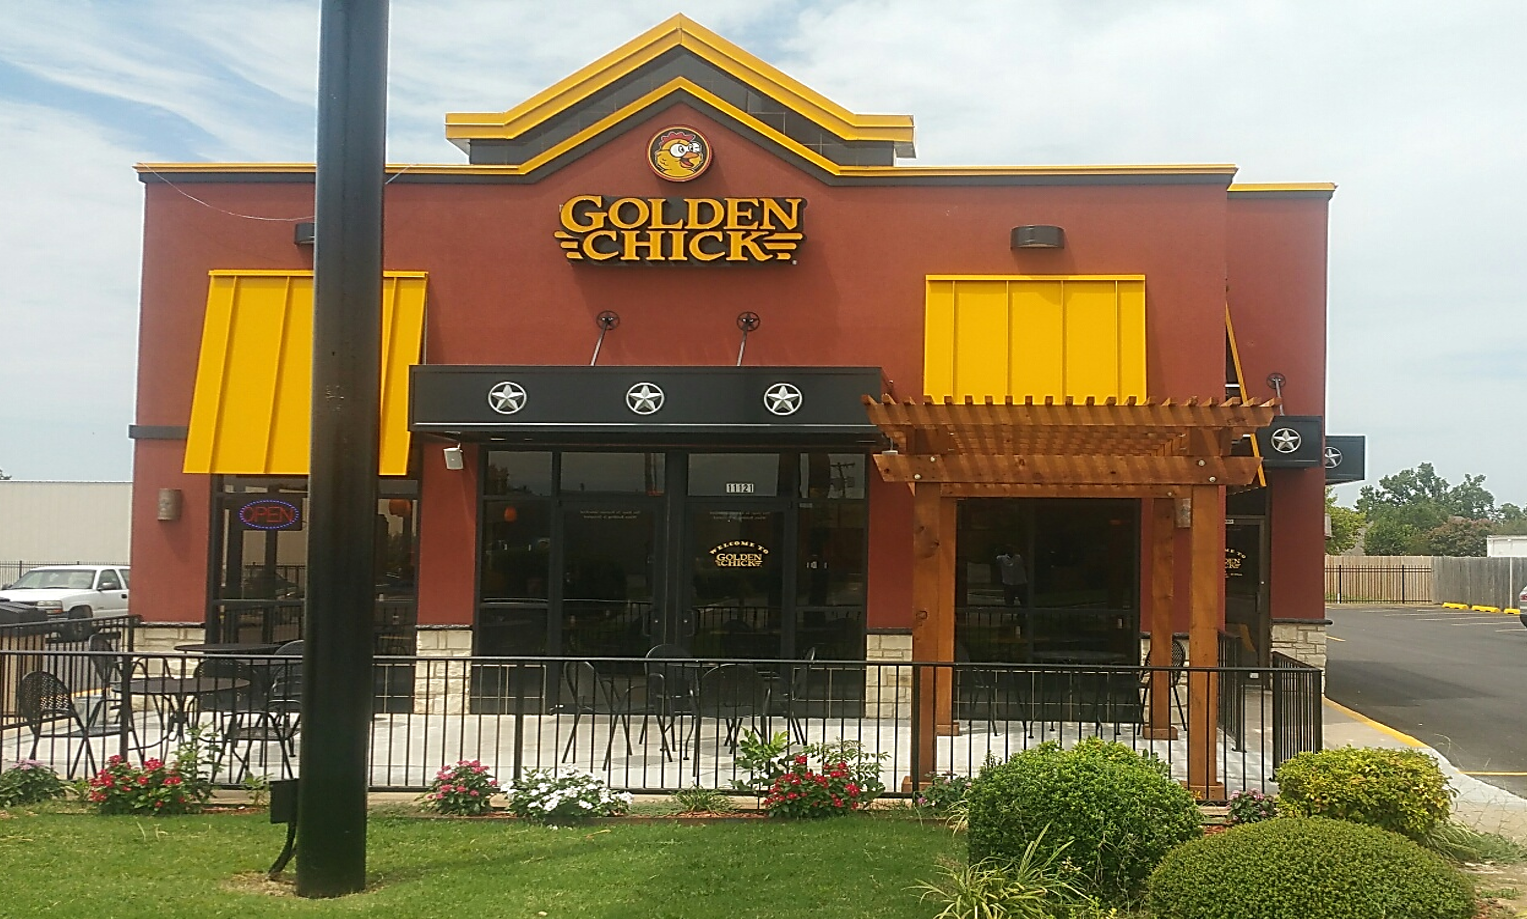 Golden Chick storefront.  Your local Golden Chick fast food restaurant in Oklahoma City, Oklahoma